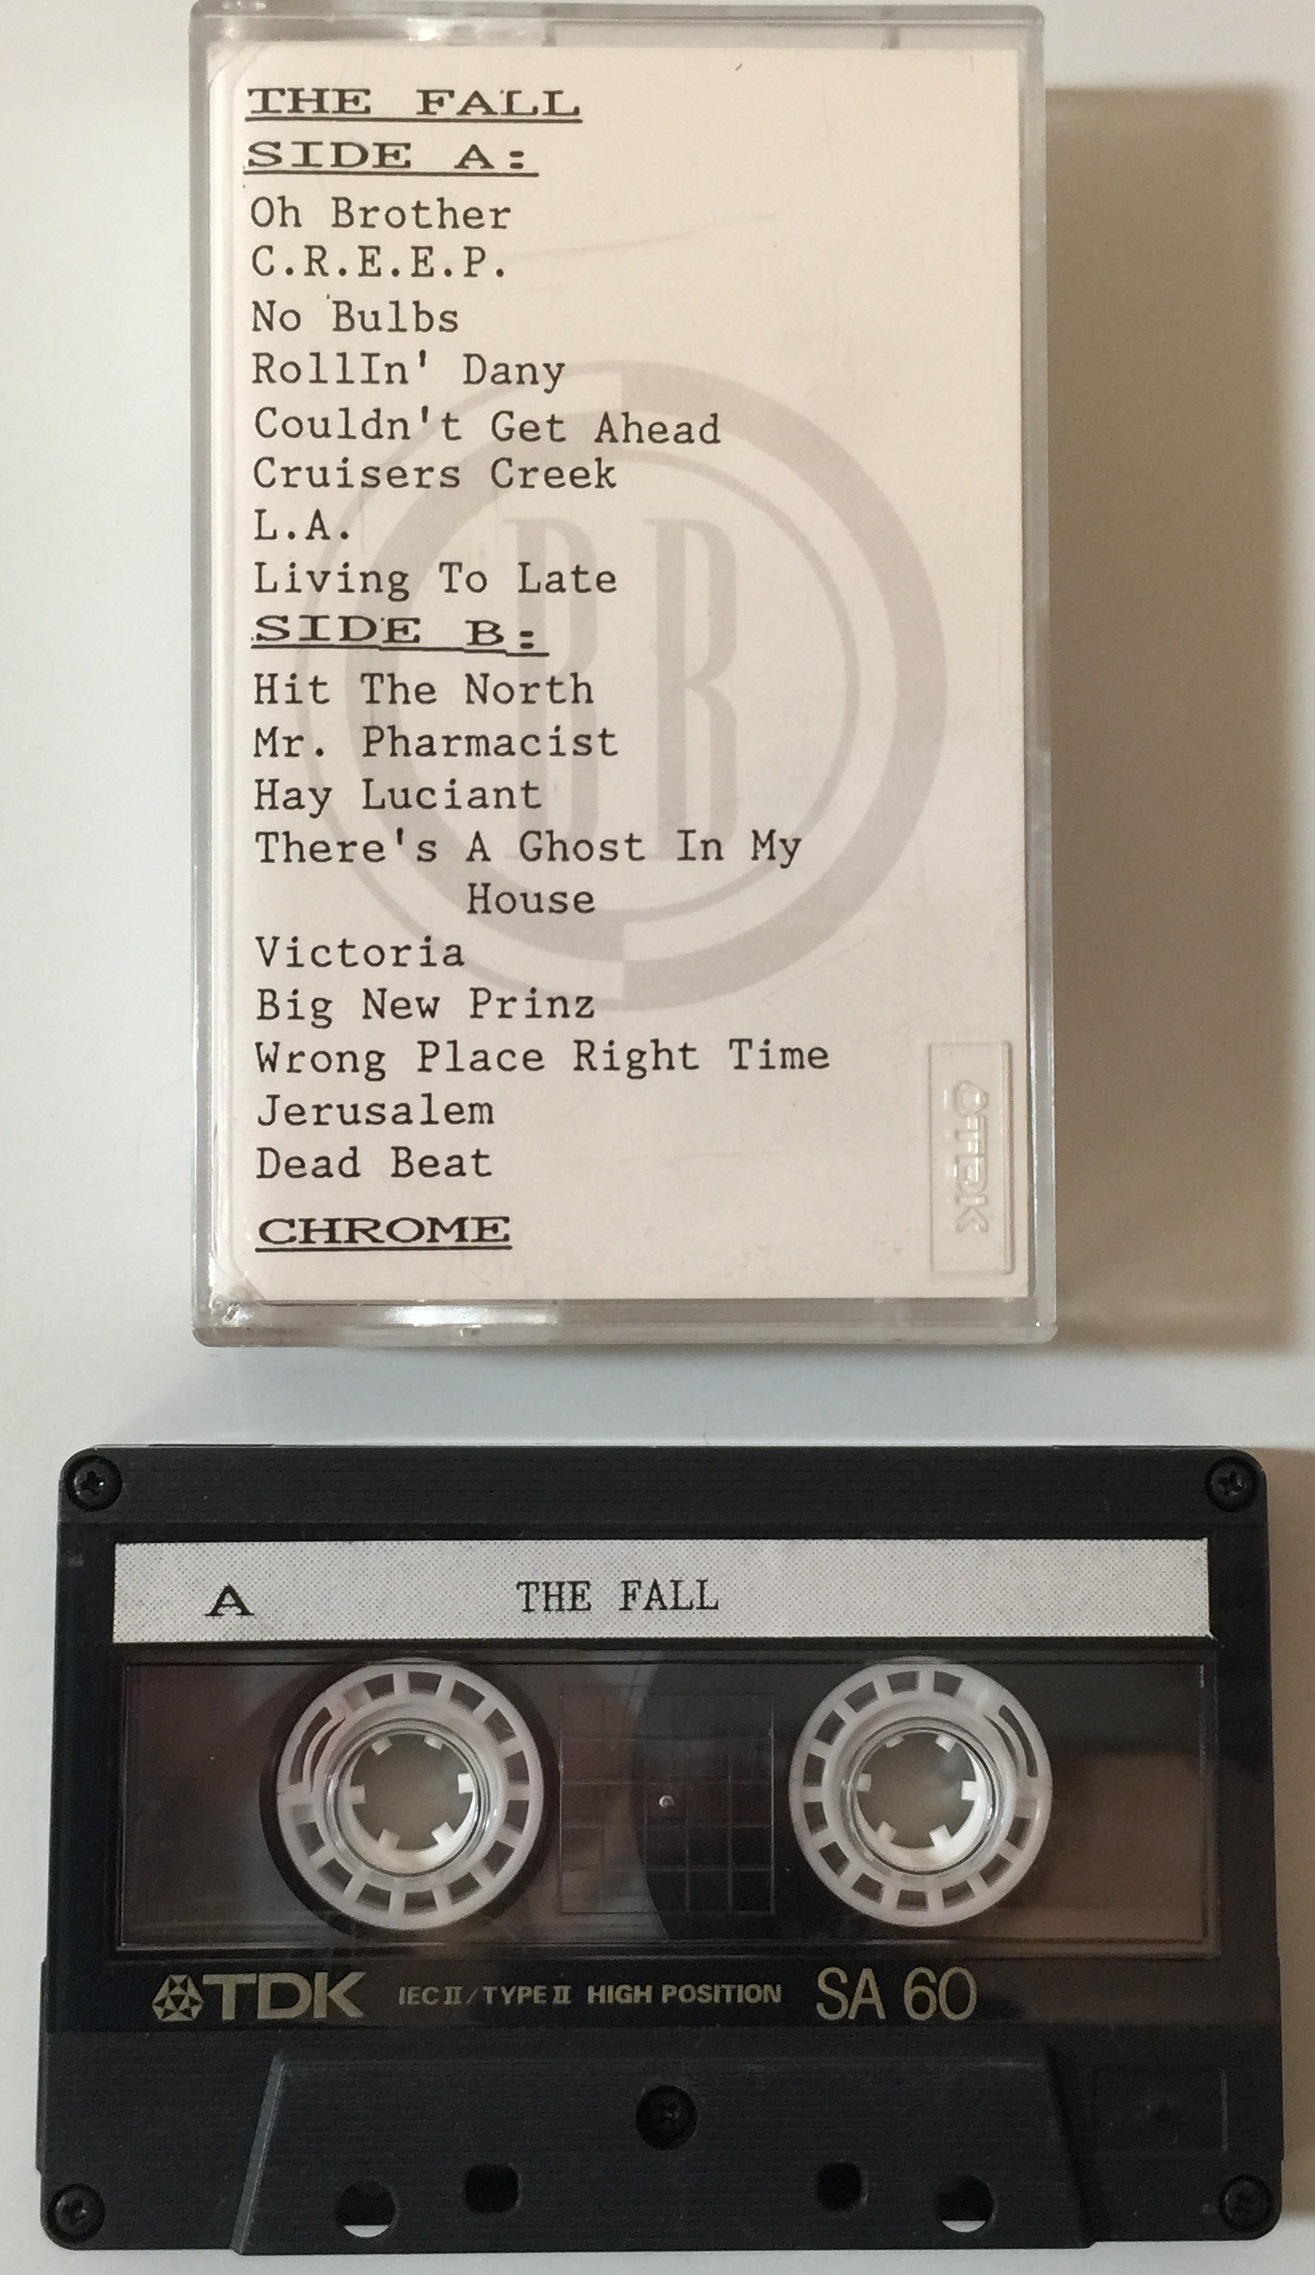 THE FALL - LP (TEST PRESSINGS) WITH CASSETTES AND CDs (MAINLY DEMO/PROMOS). - Image 8 of 9